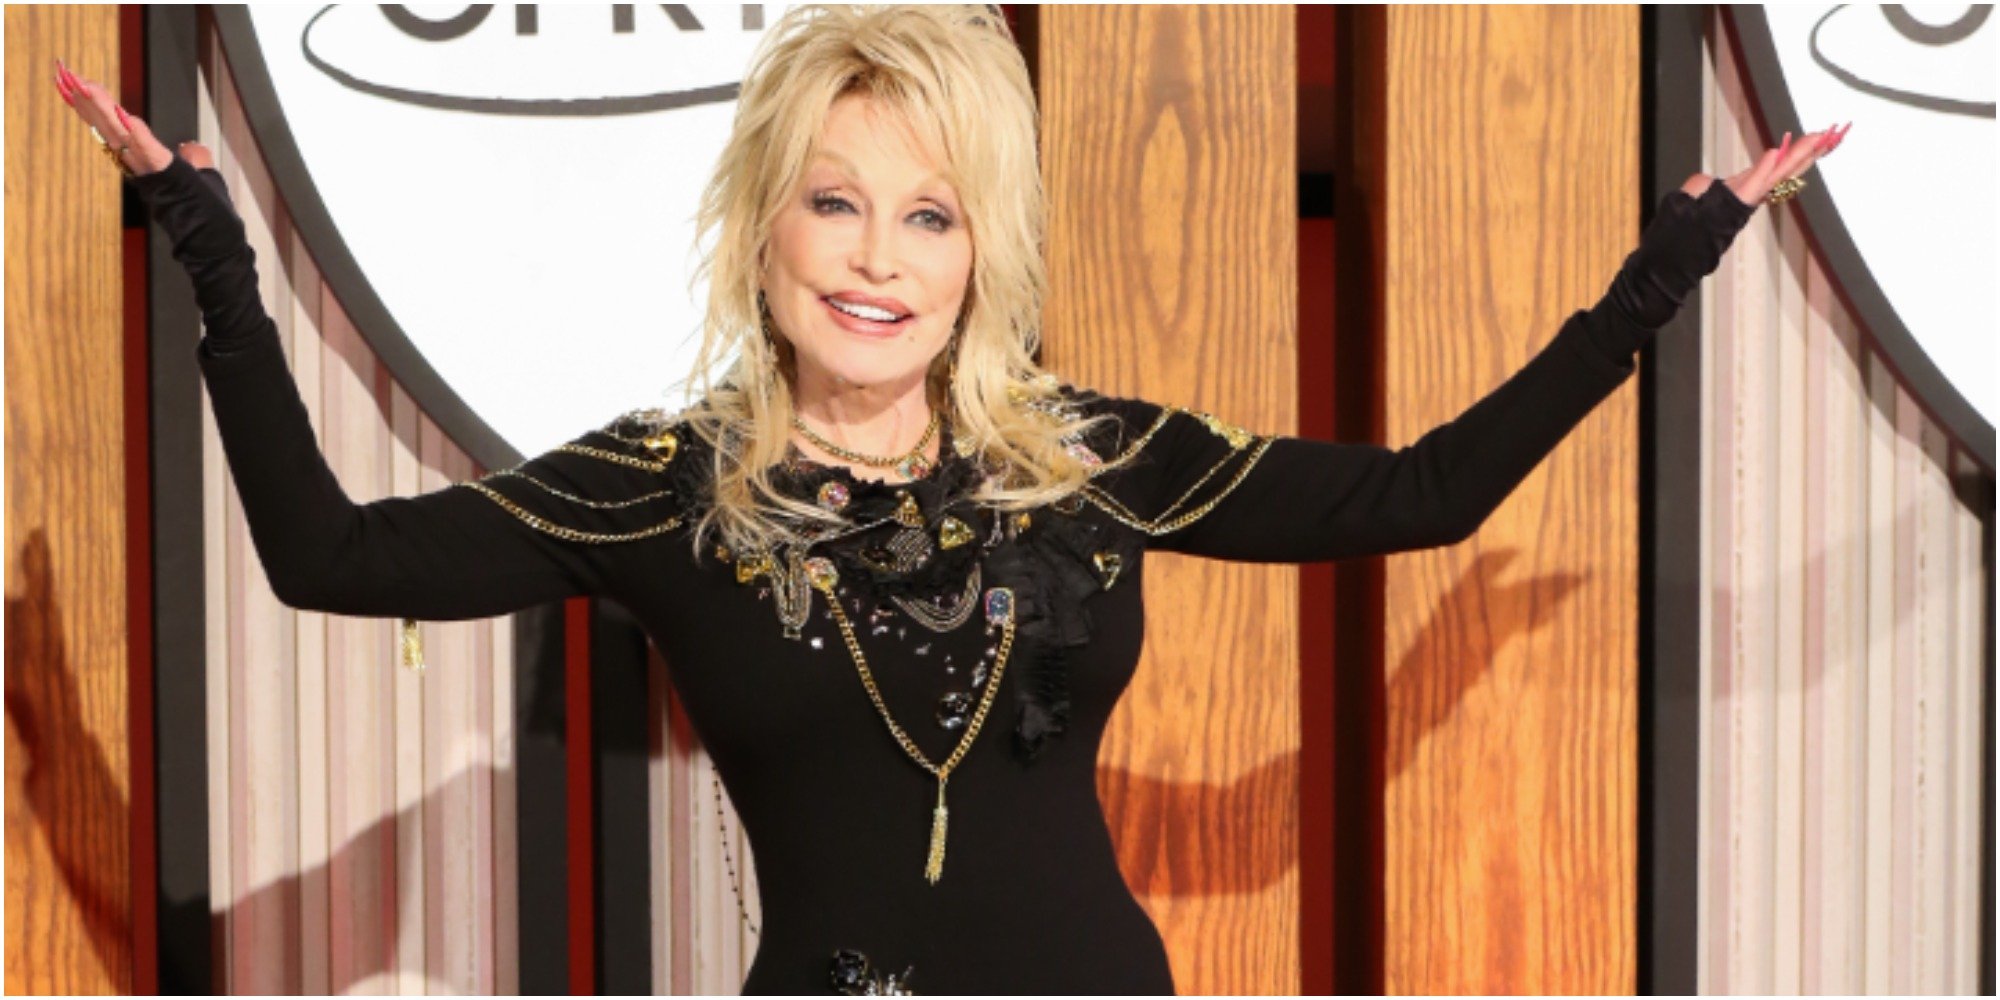 Dolly Parton poses at the Grand Ole Opry.